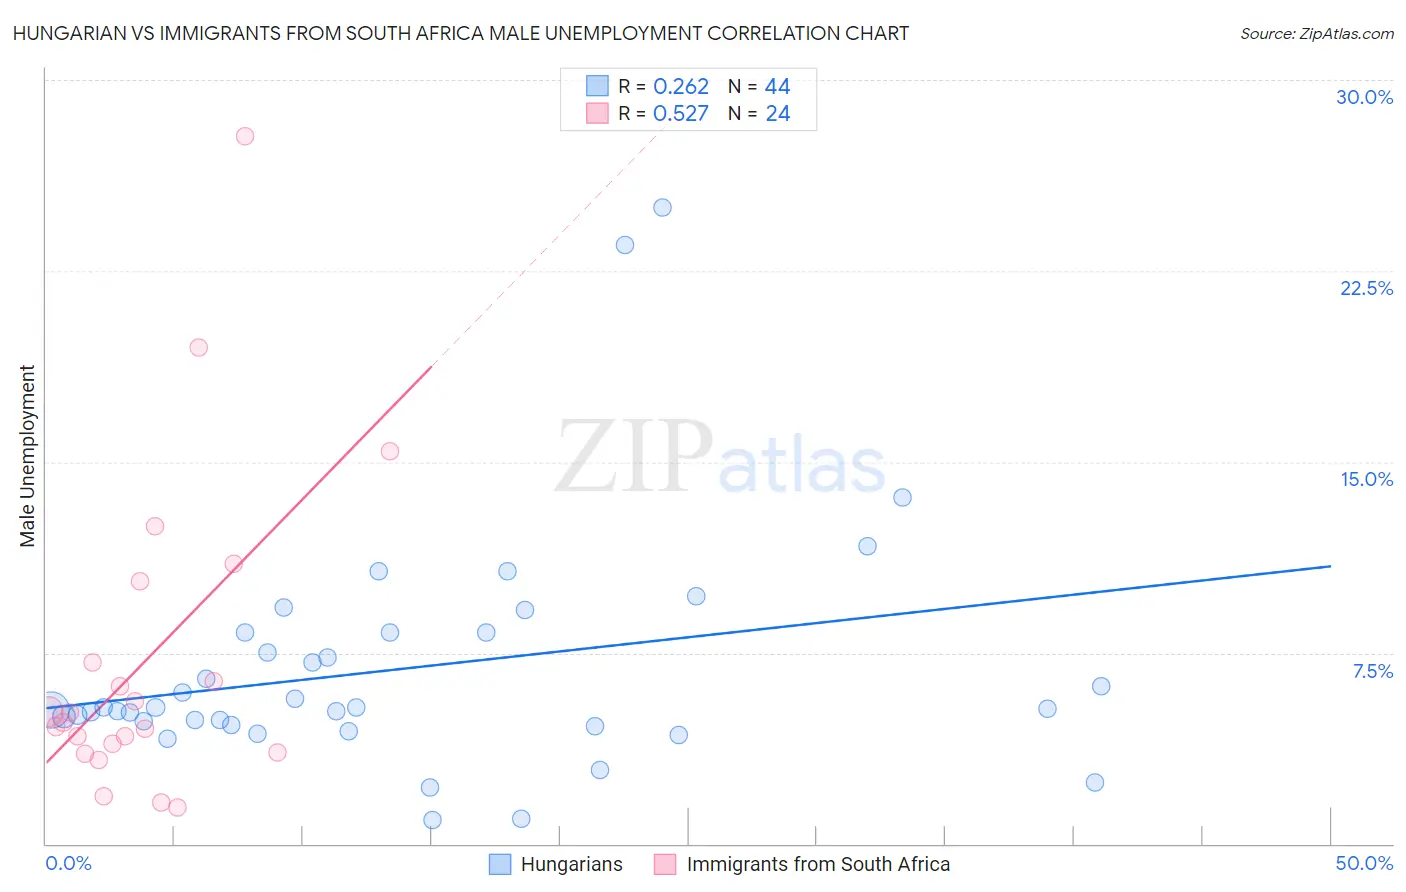 Hungarian vs Immigrants from South Africa Male Unemployment